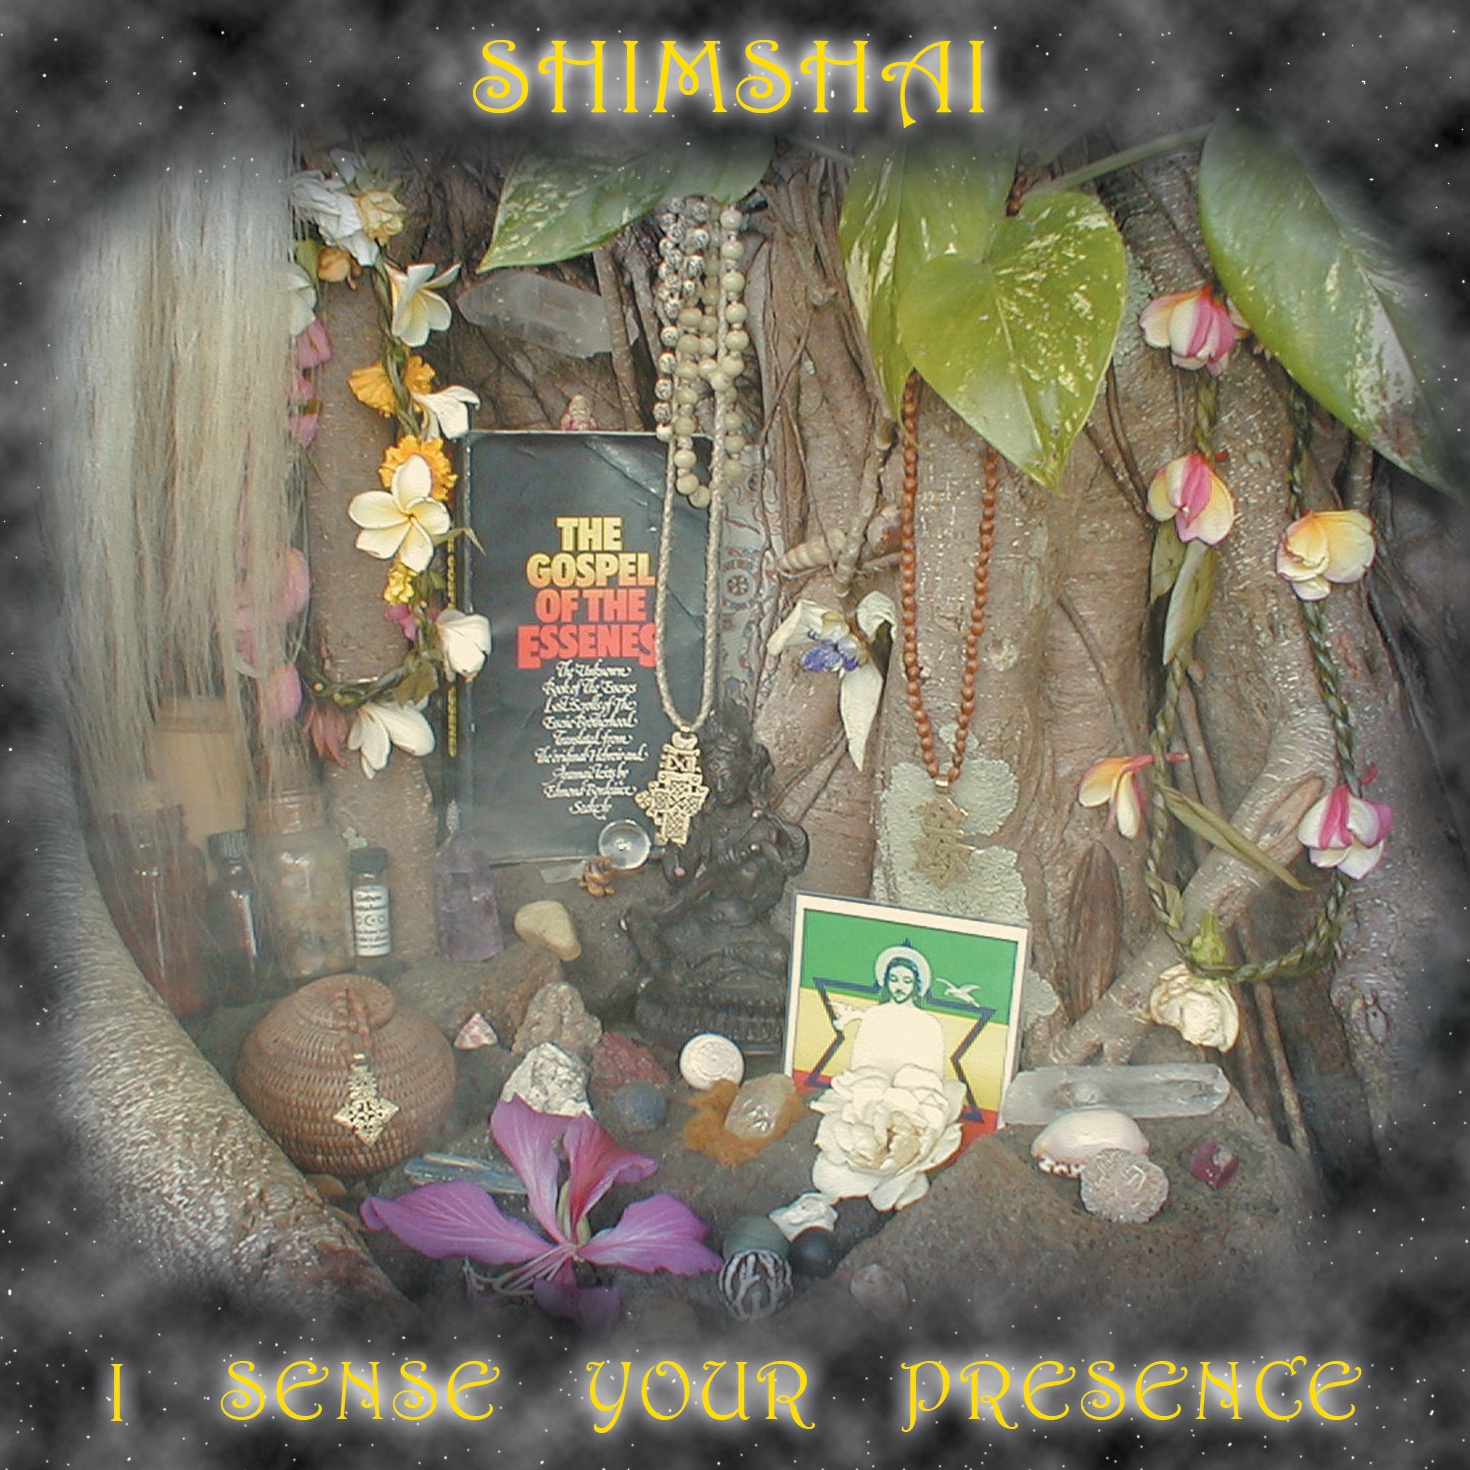 Communion by Shimshai from the album I Sense Your Presence, original music with prayers of the Ancient Essenes